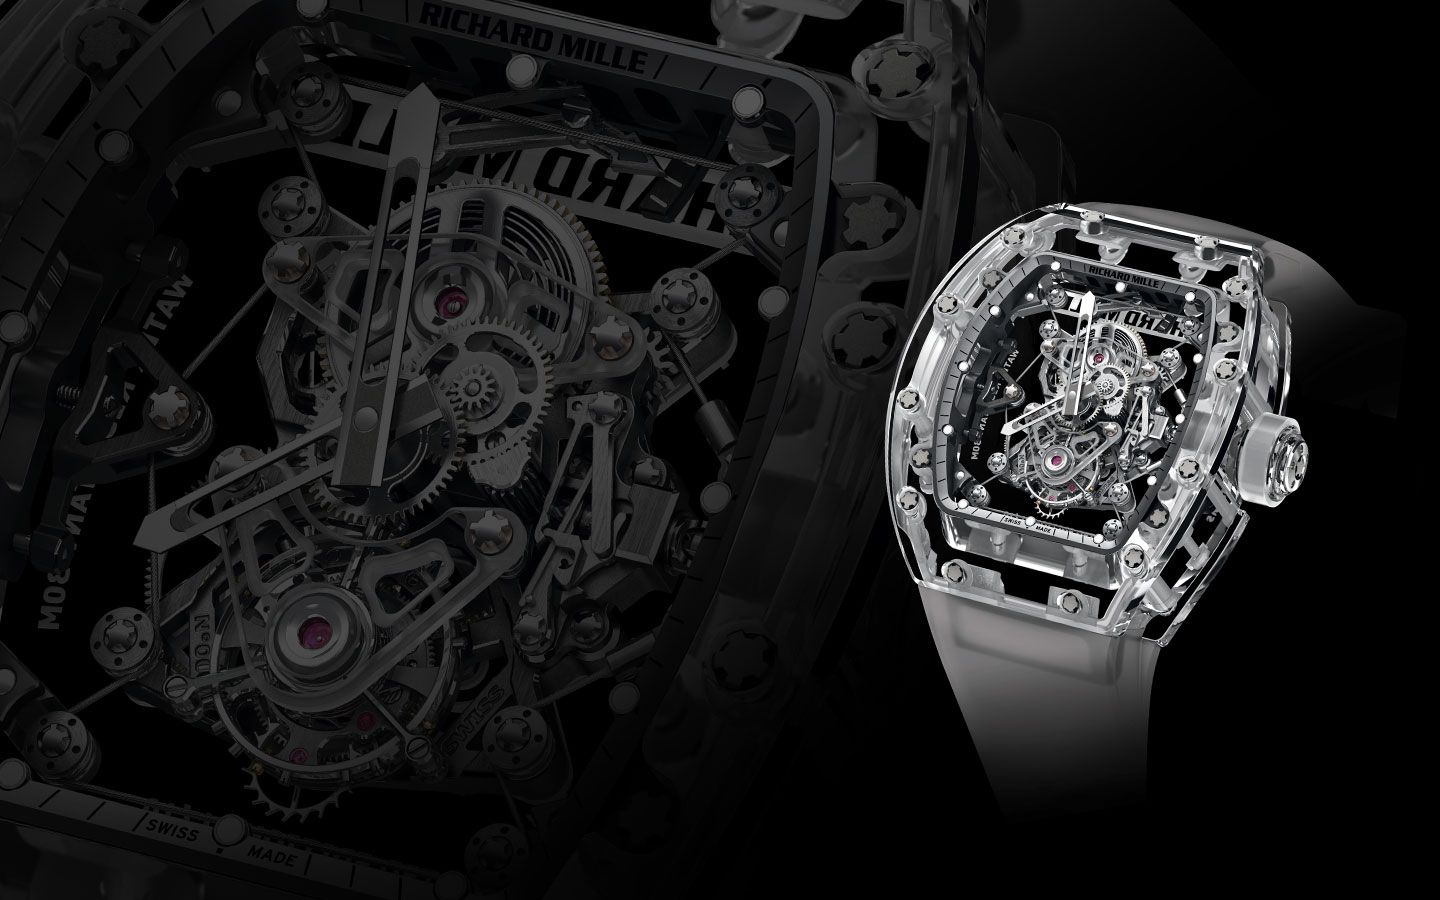 Sell your Richard Mille watch in London for cash. Buy luxury watch. PWL